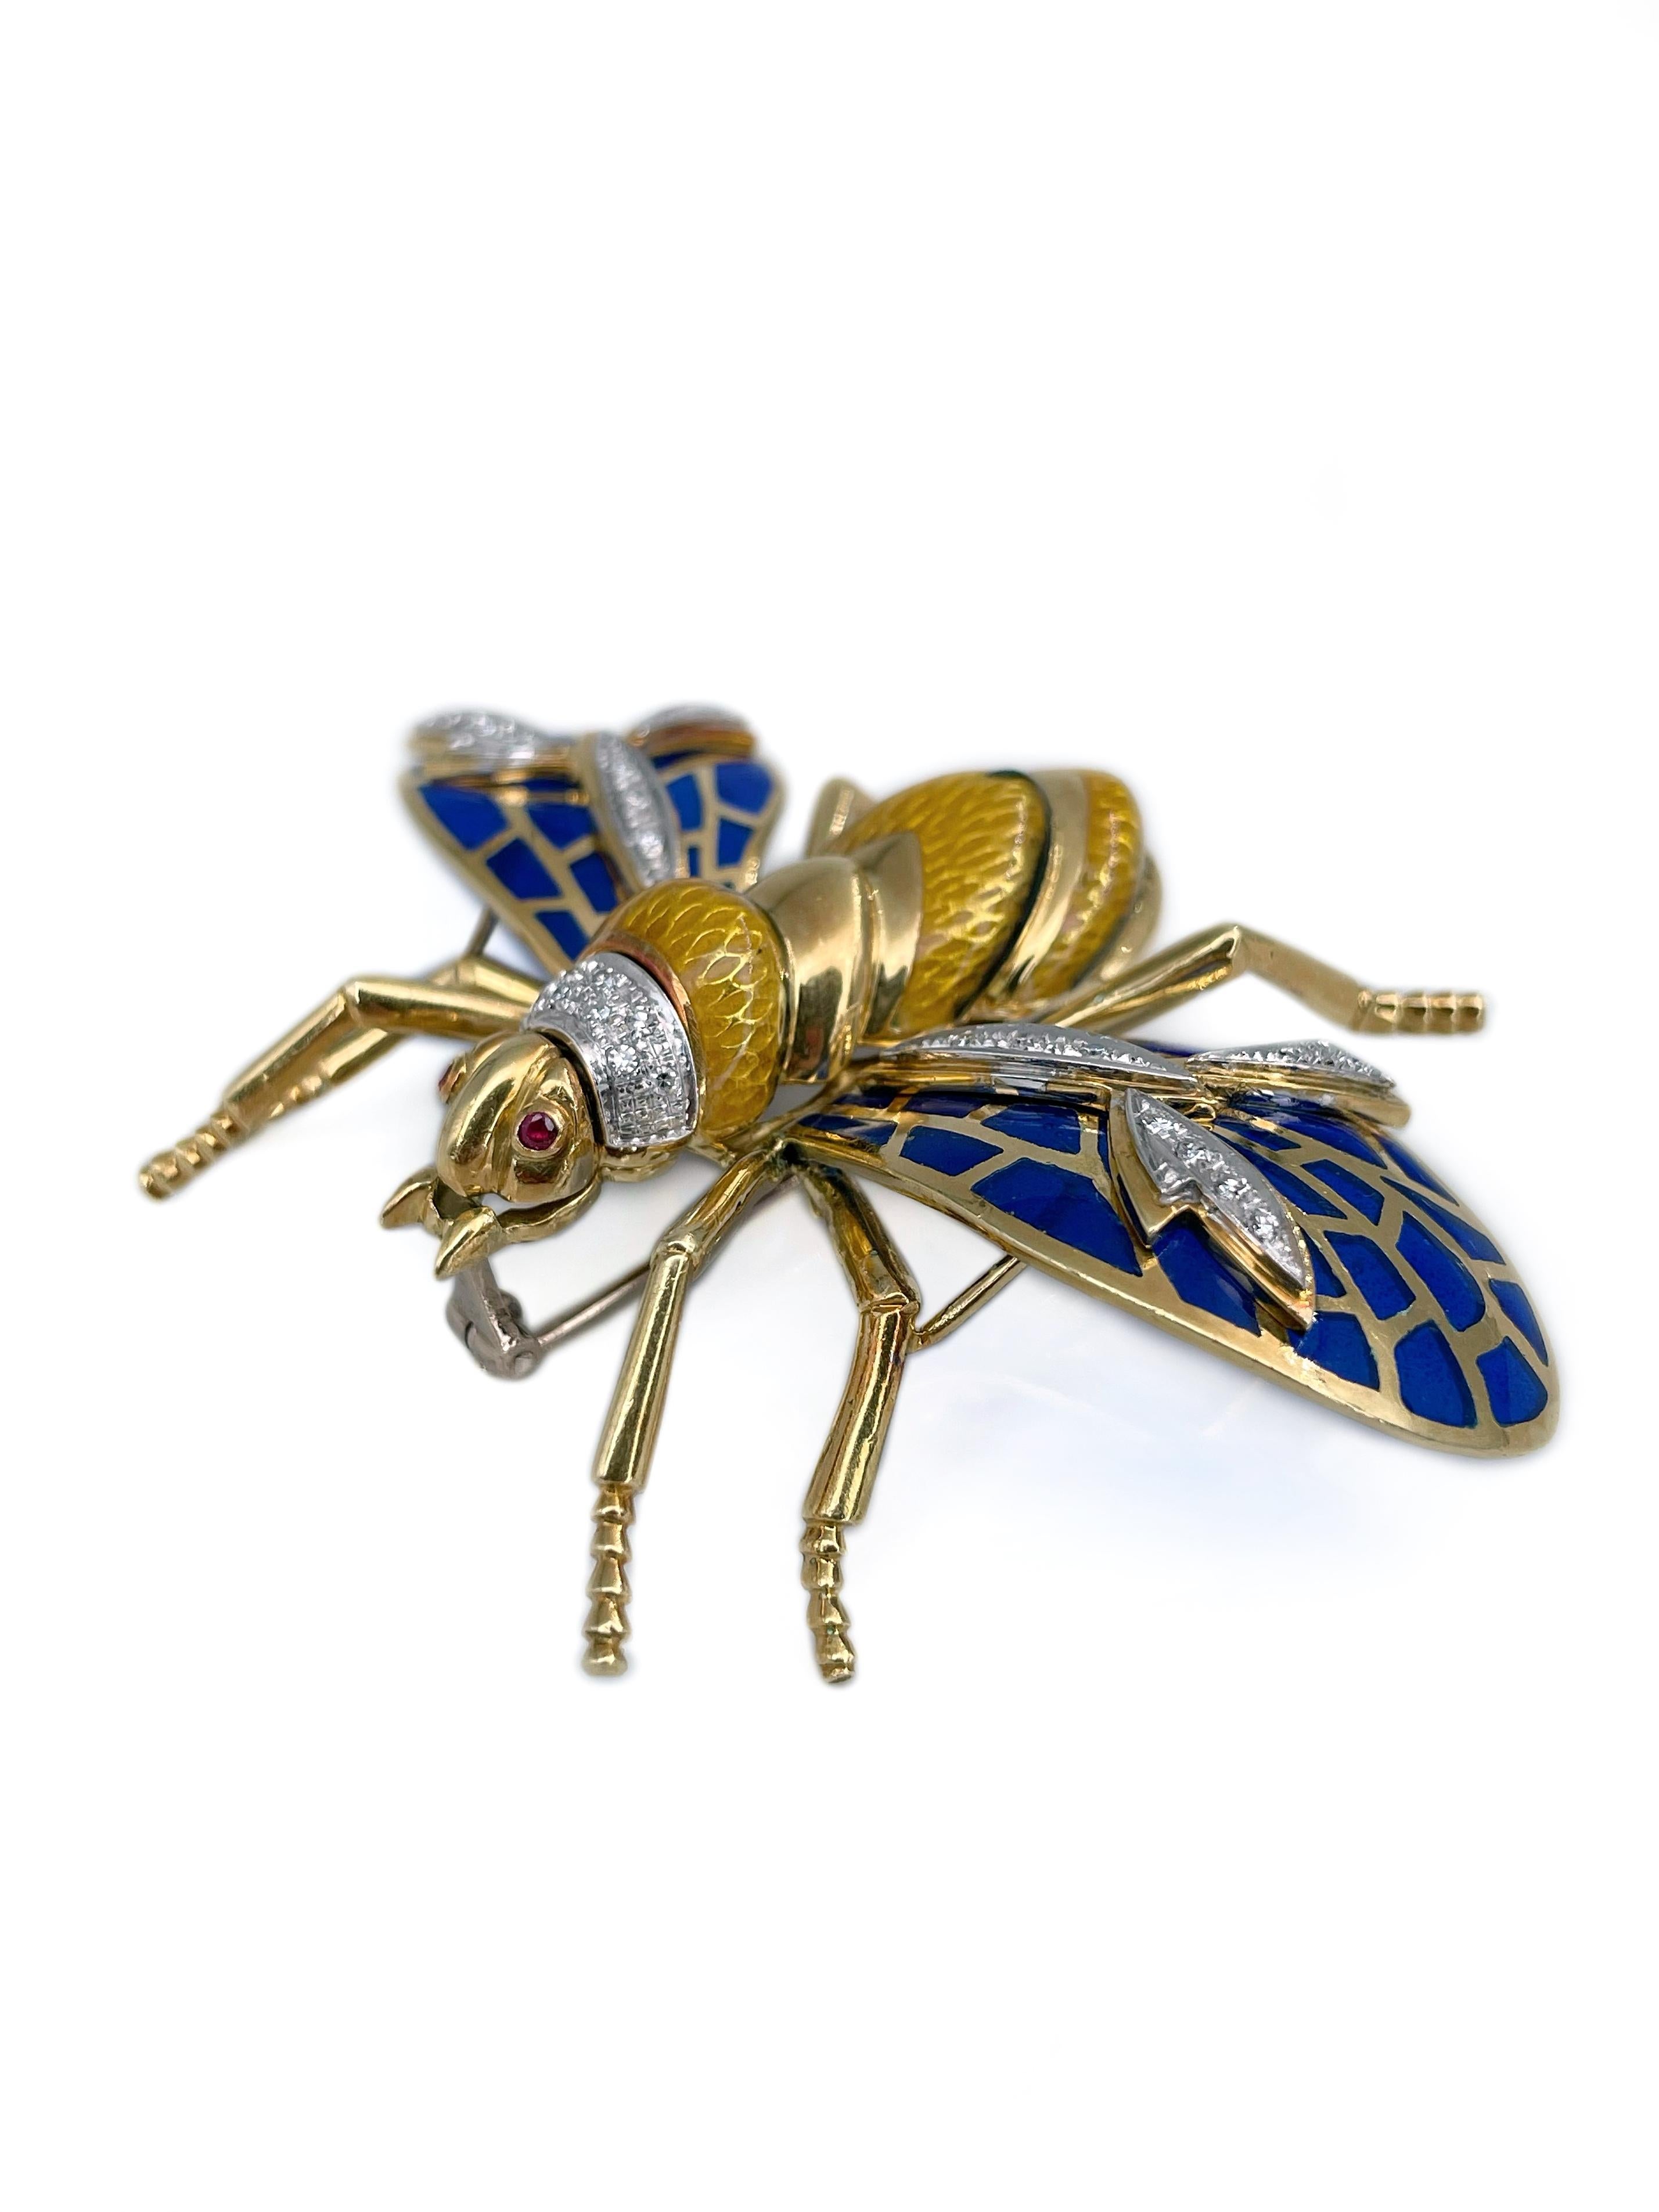 This is a Mid Century bee shape pin brooch crafted in 18K gold. Circa 1950.

The piece features blue Plique a jour enamel. The insect is adorned with diamonds and rubies. 

Has a safe trombone clasp. 

Weight: 36.75g
Size: 7.5x6cm

———

If you have